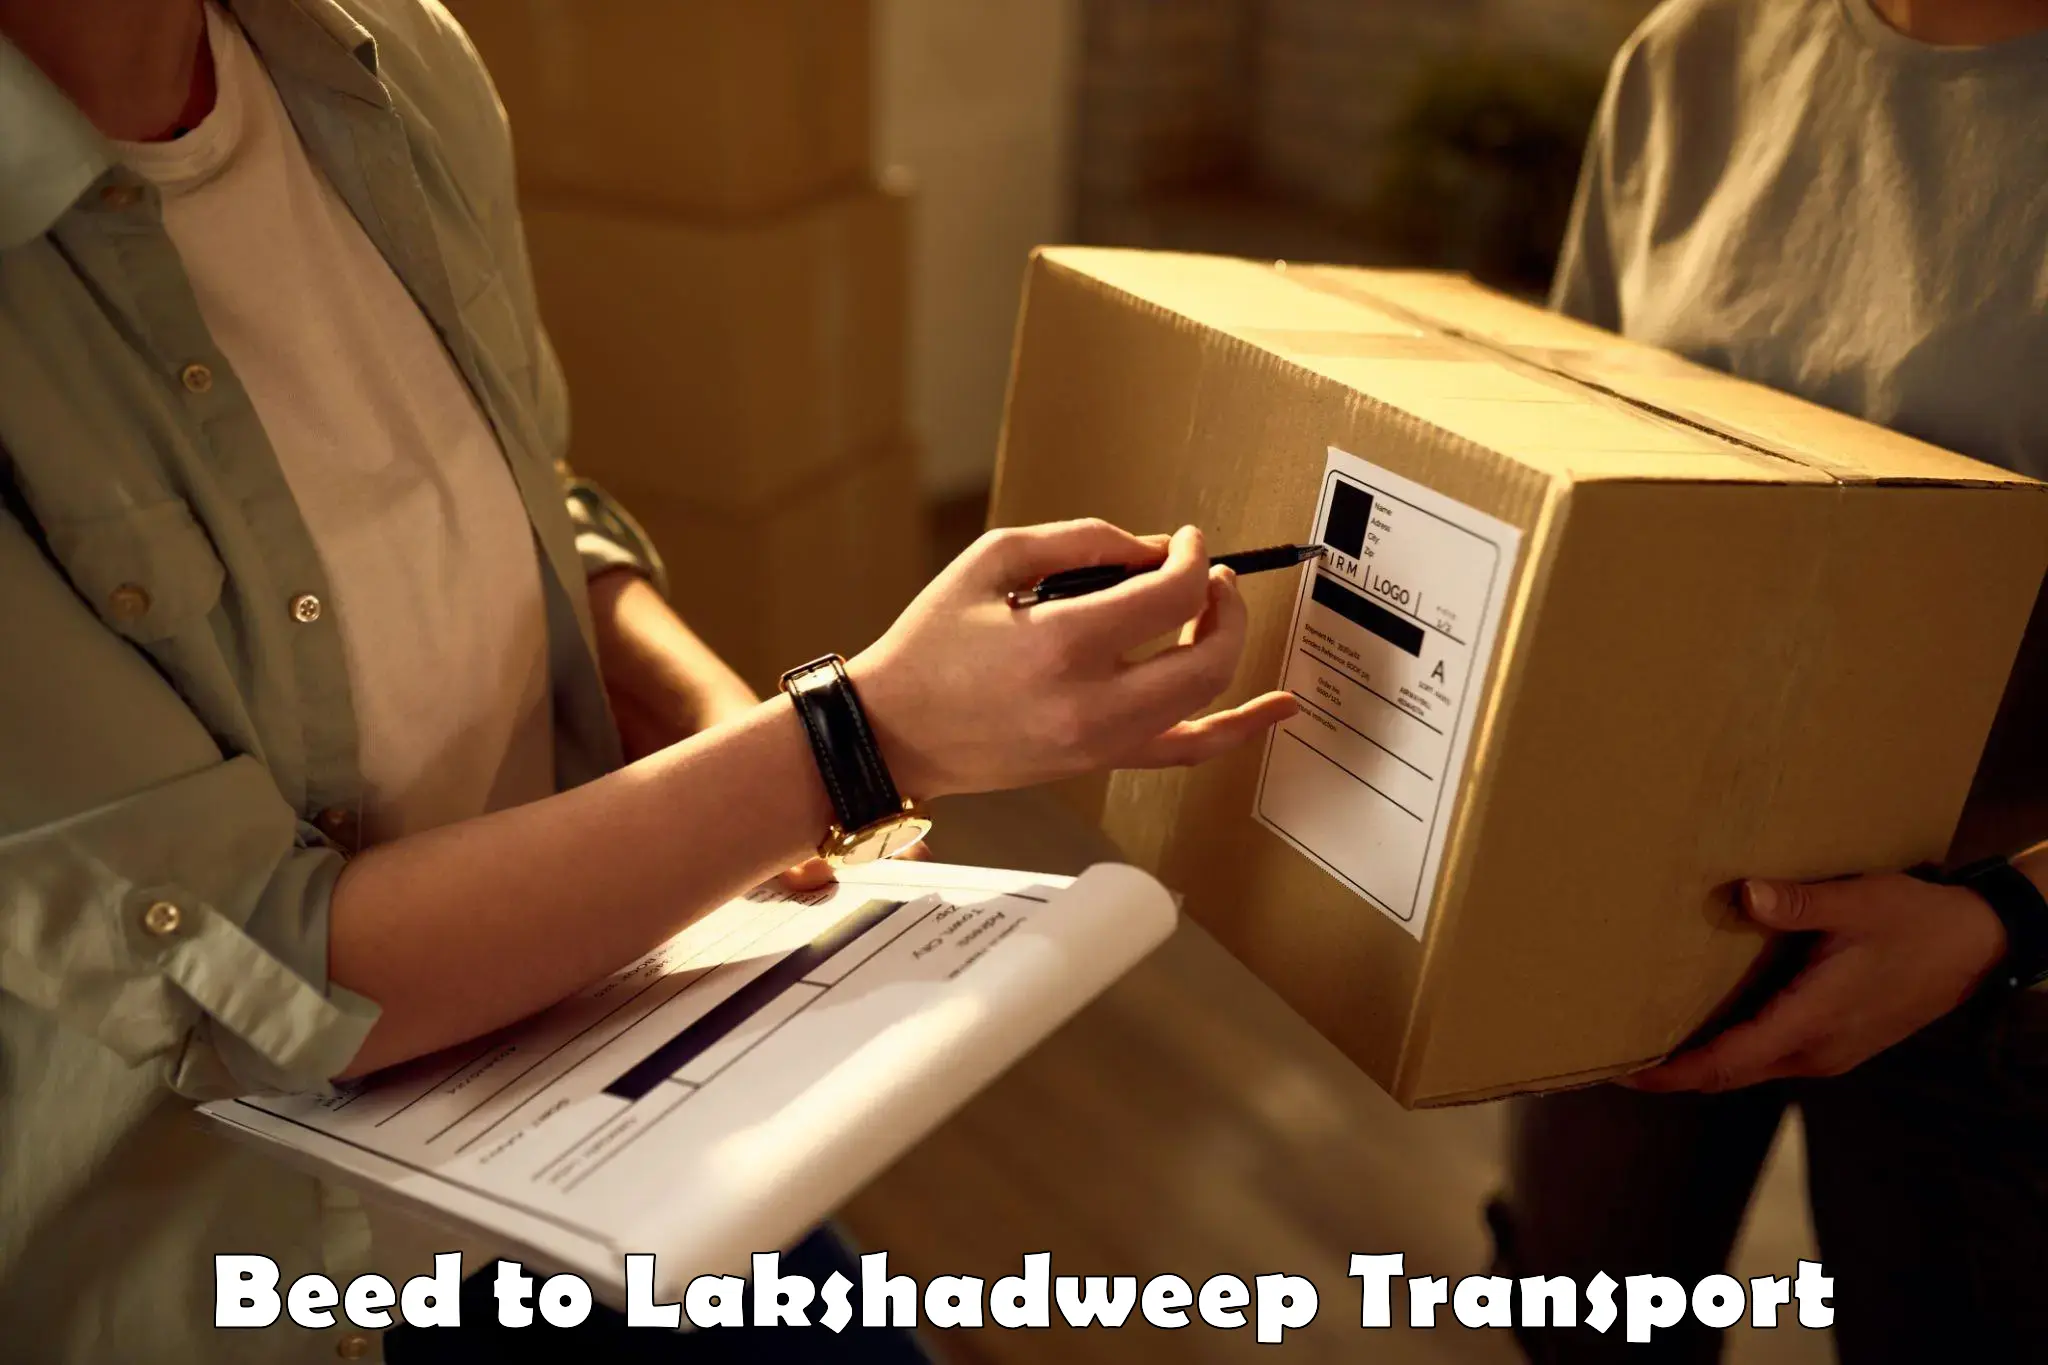 Daily parcel service transport Beed to Lakshadweep